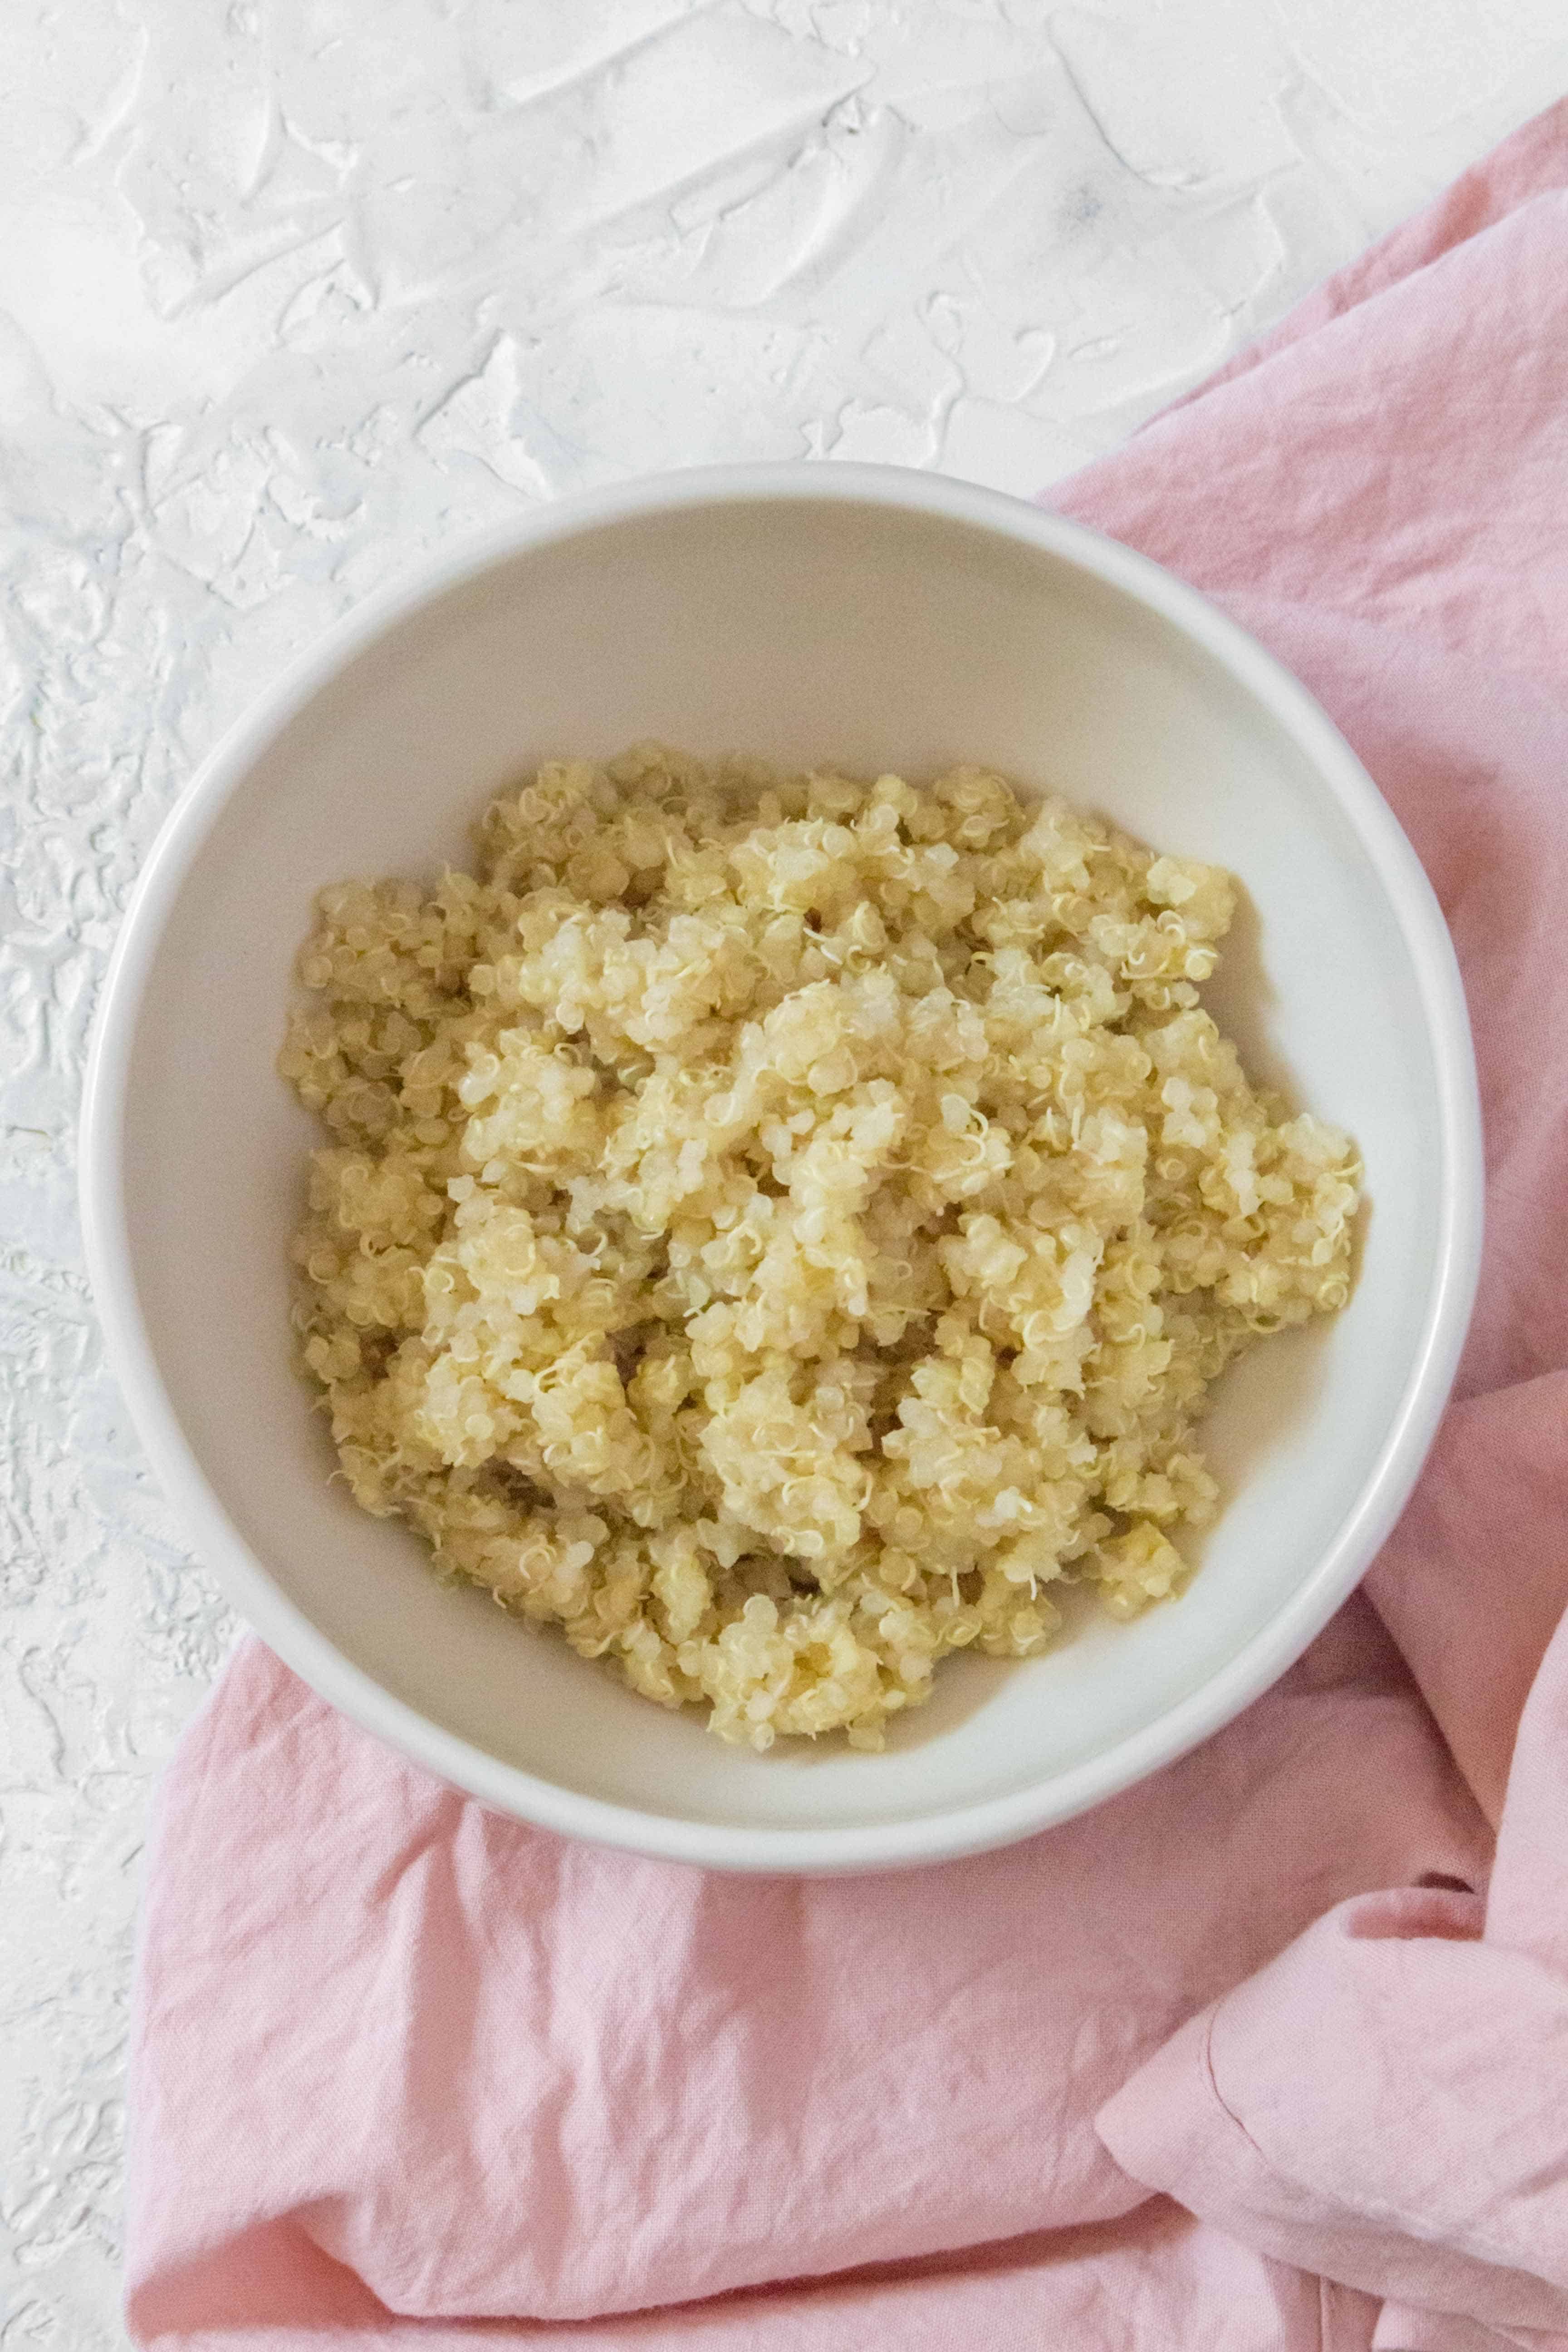 A staple in my meal prep, here's how I make the perfect Instant Pot Quinoa! Fluffy, quick, and fail-proof!